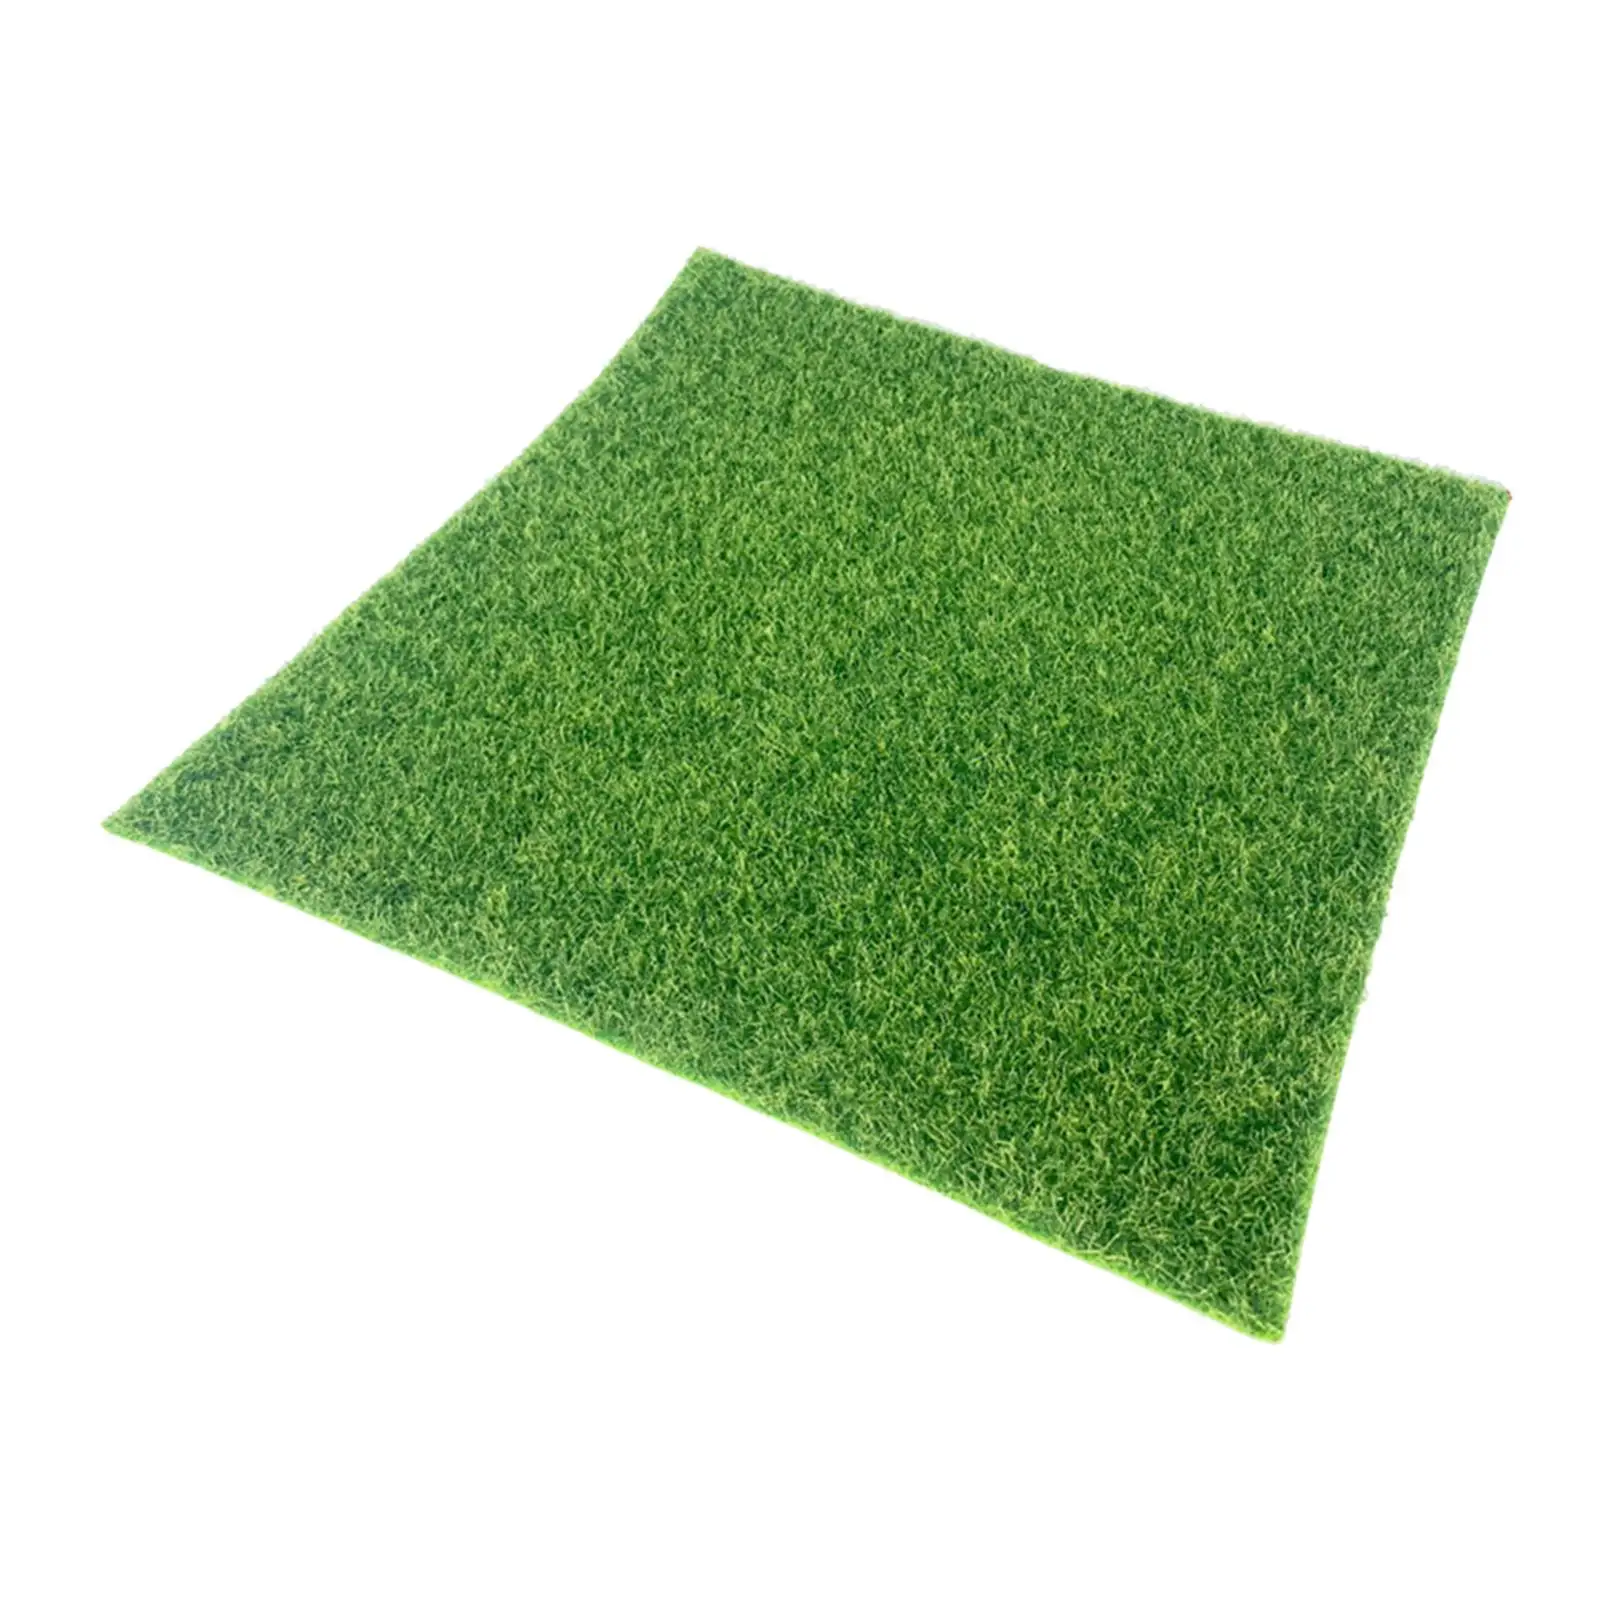 Artificial Grass Mat Dogs training Area Rug Lawn Turf for Sand Table DIY Micro Landscape Home Patio Decoration